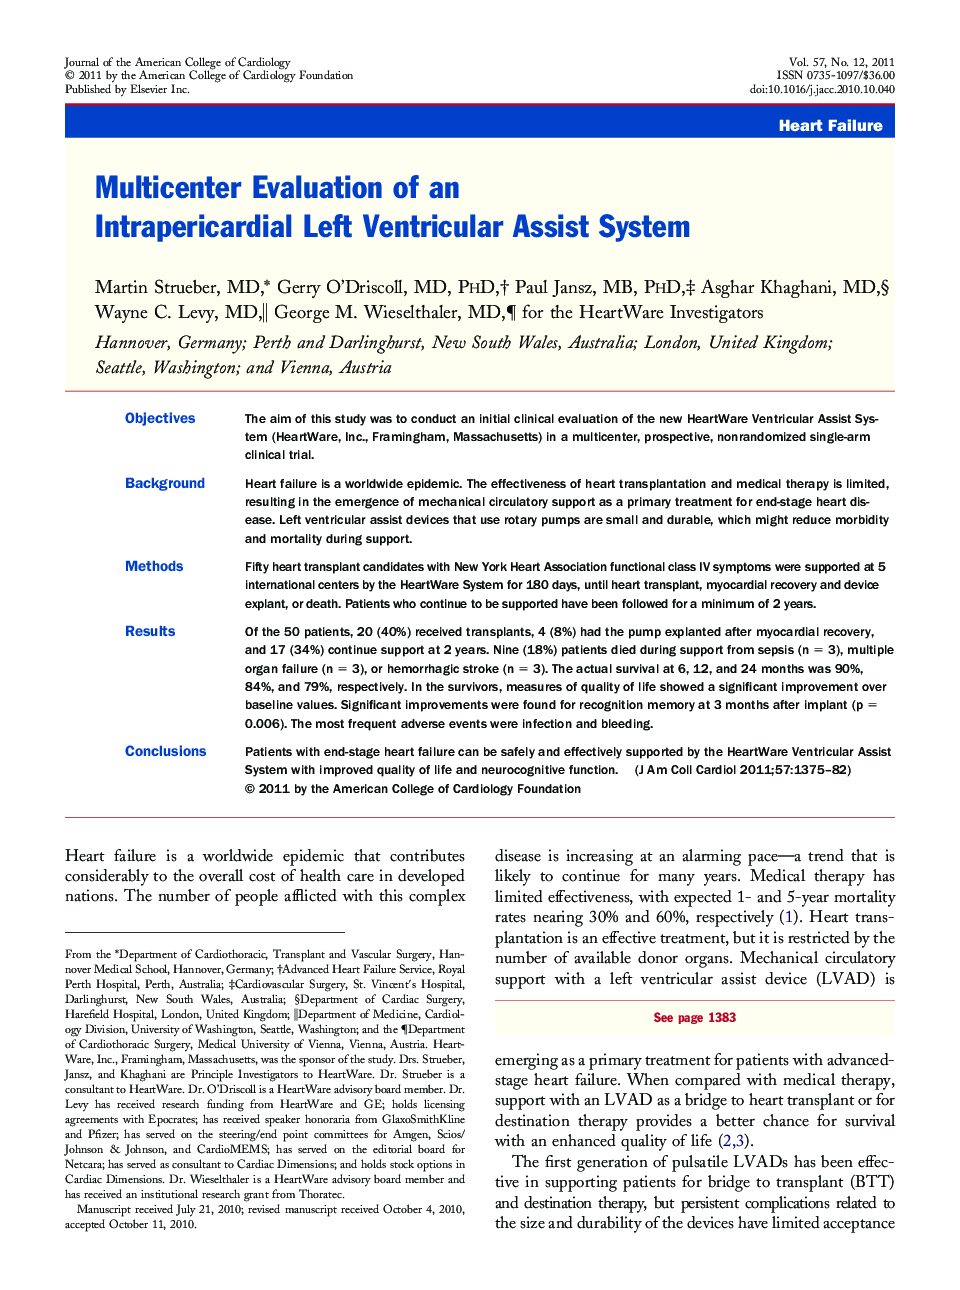 Multicenter Evaluation of an Intrapericardial Left Ventricular Assist System 